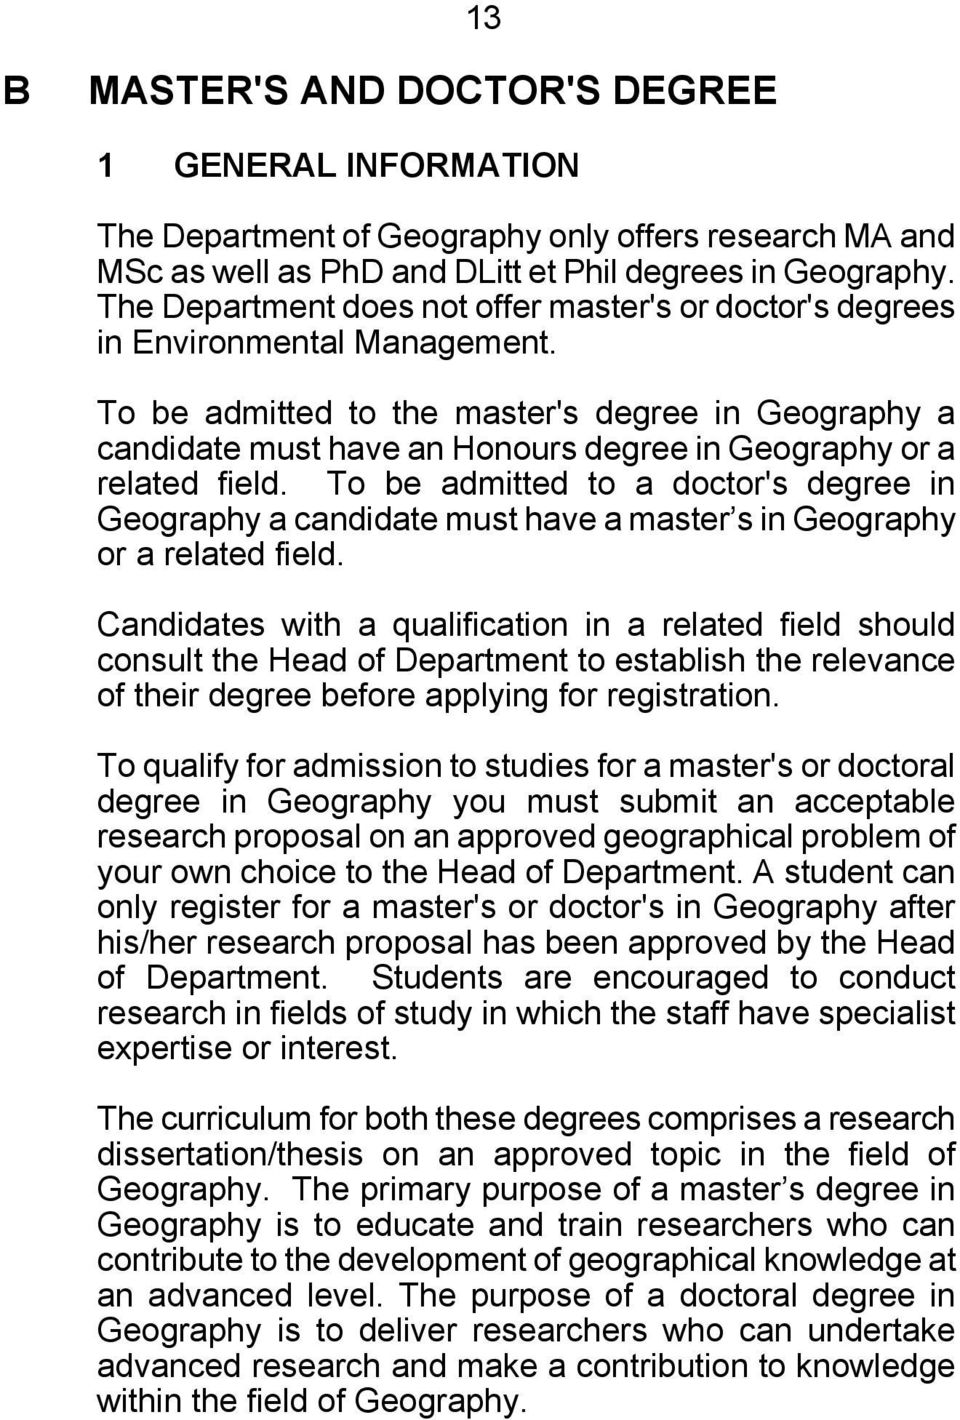 To be admitted to the master's degree in Geography a candidate must have an Honours degree in Geography or a related field.